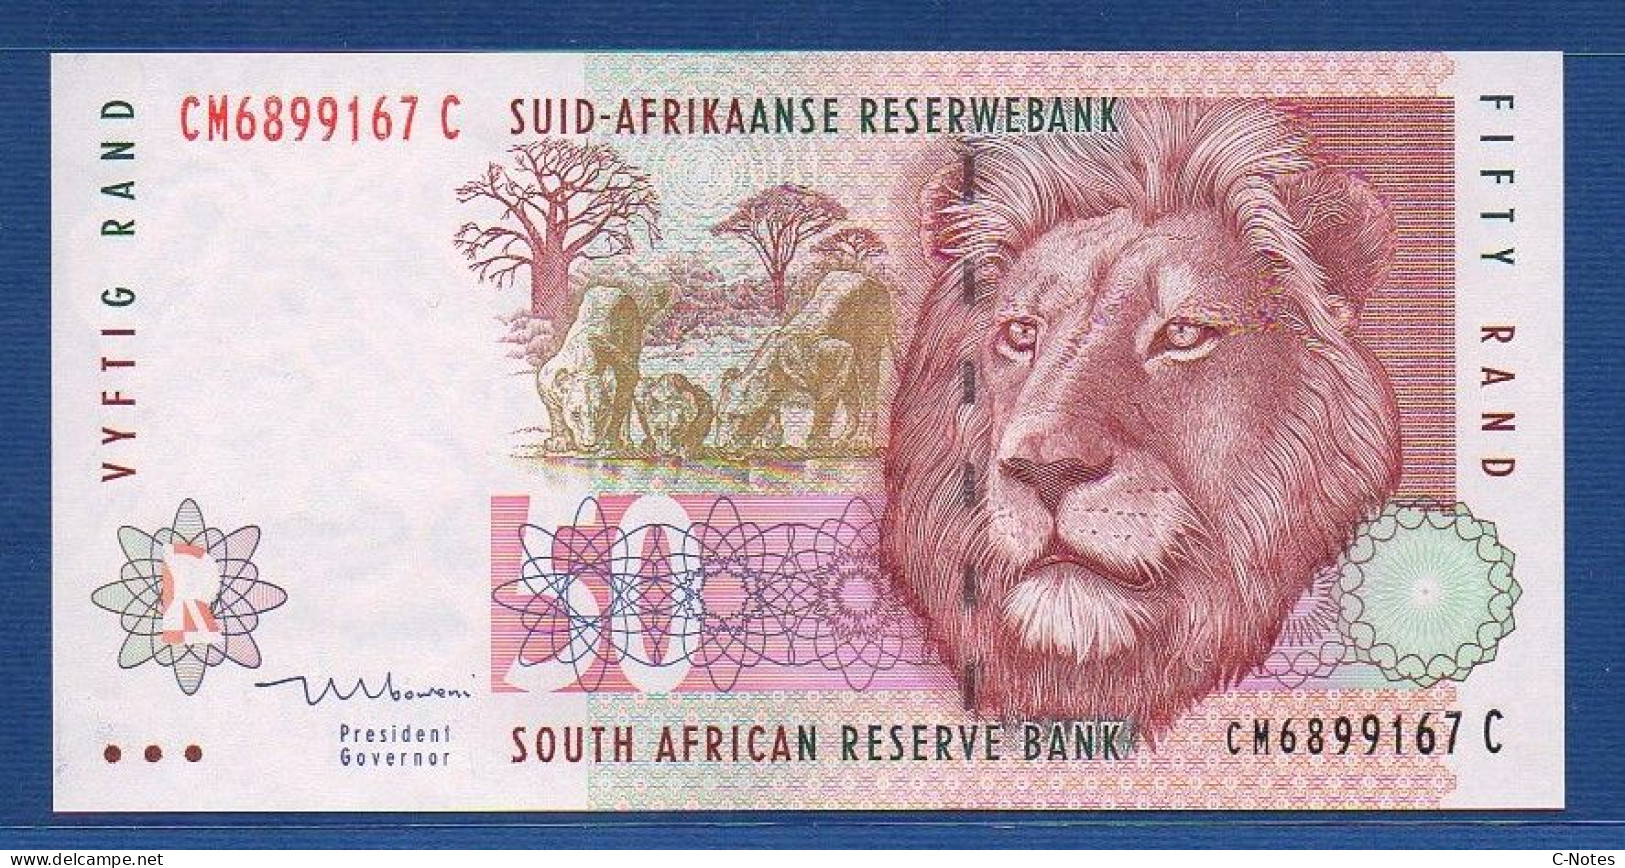 SOUTH AFRICA - P.125c – 50 RAND ND (1992 - 1999) UNC, S/n CM6899167C - South Africa